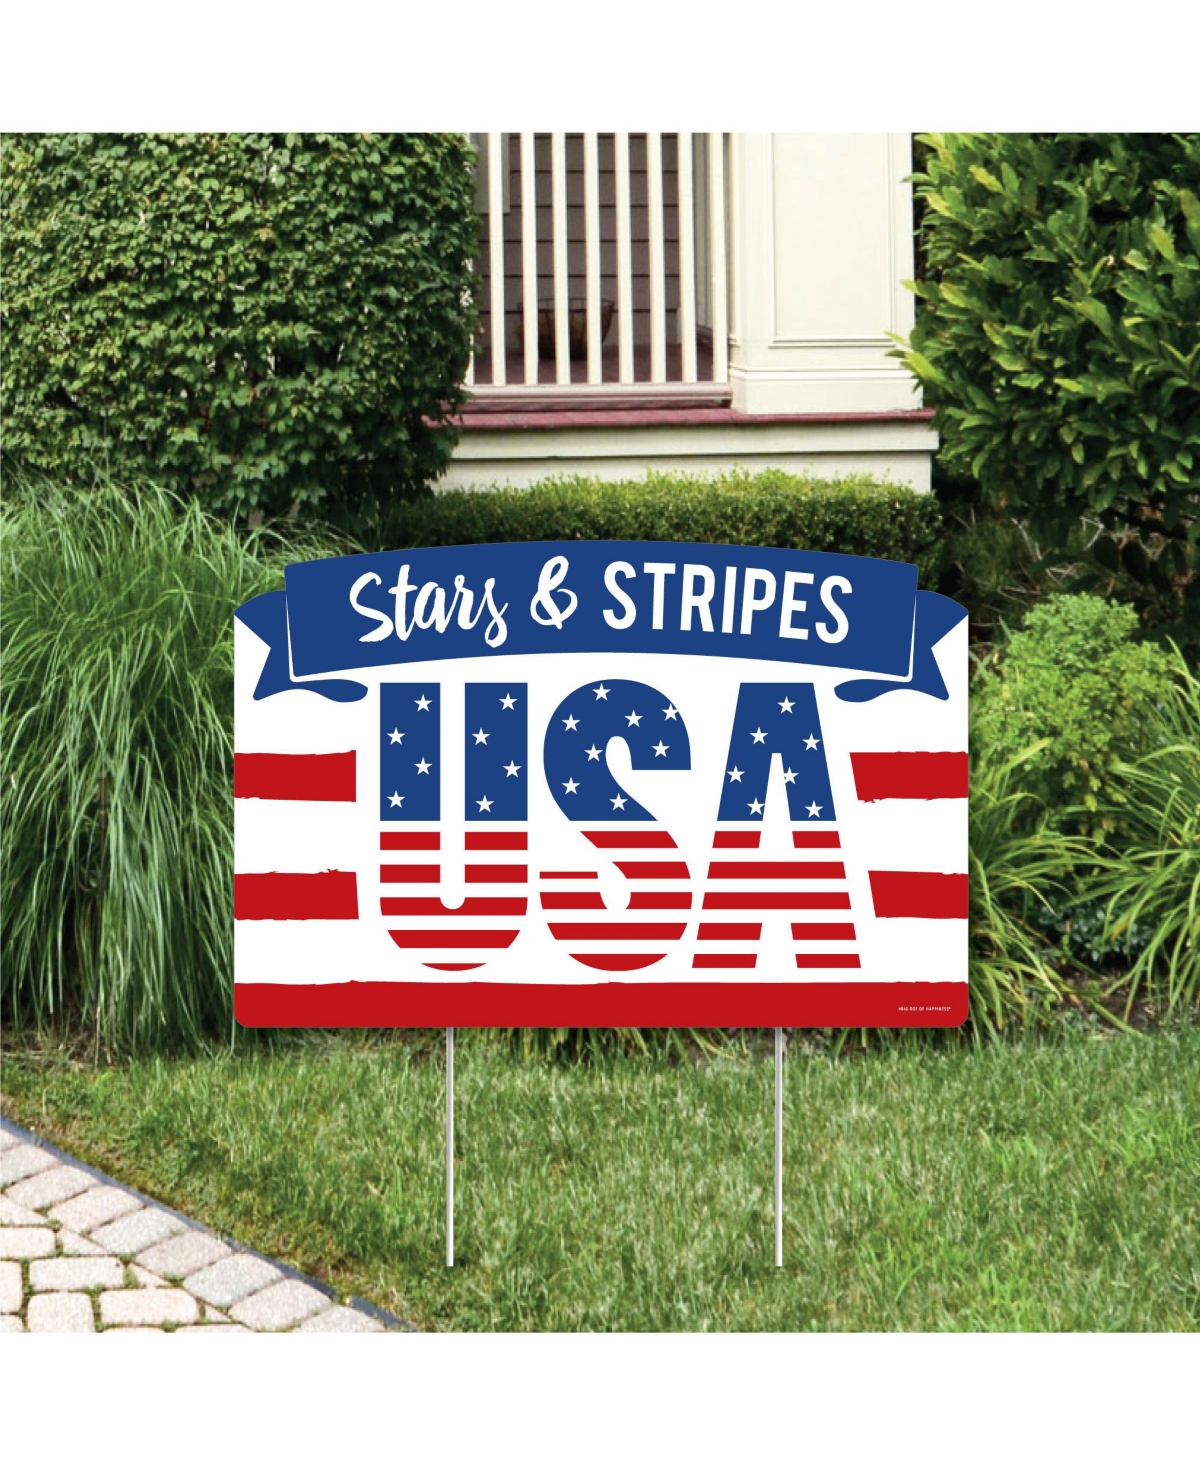 Stars & Stripes - Usa Patriotic Party Yard Sign Lawn Decor - Party Yardy Sign